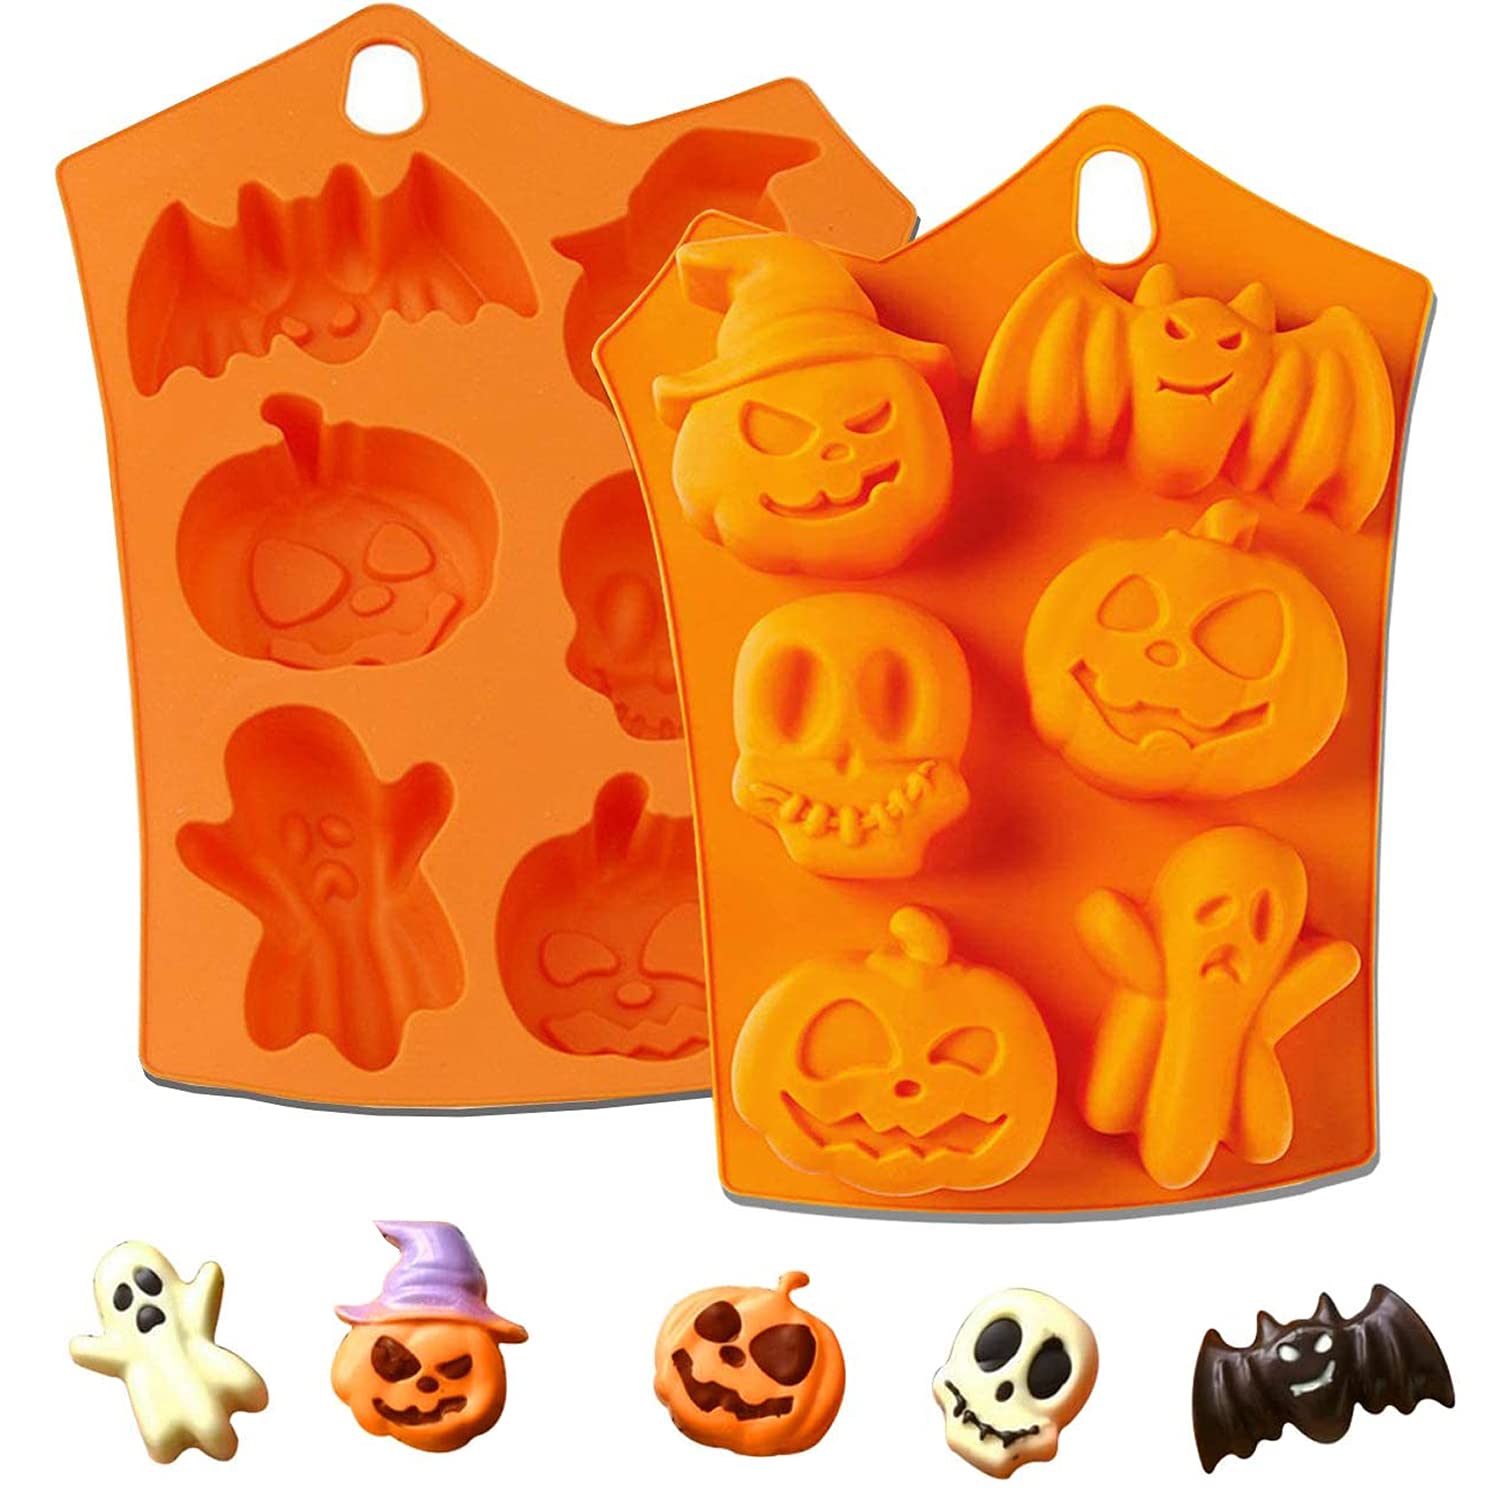 OMDBAGD 2Pcs Halloween Silicone cake Mold,Pumpkin Bat Skull ghost Shape Silicone candy chocolate Molds for DIY cookies Soap candy gummy 